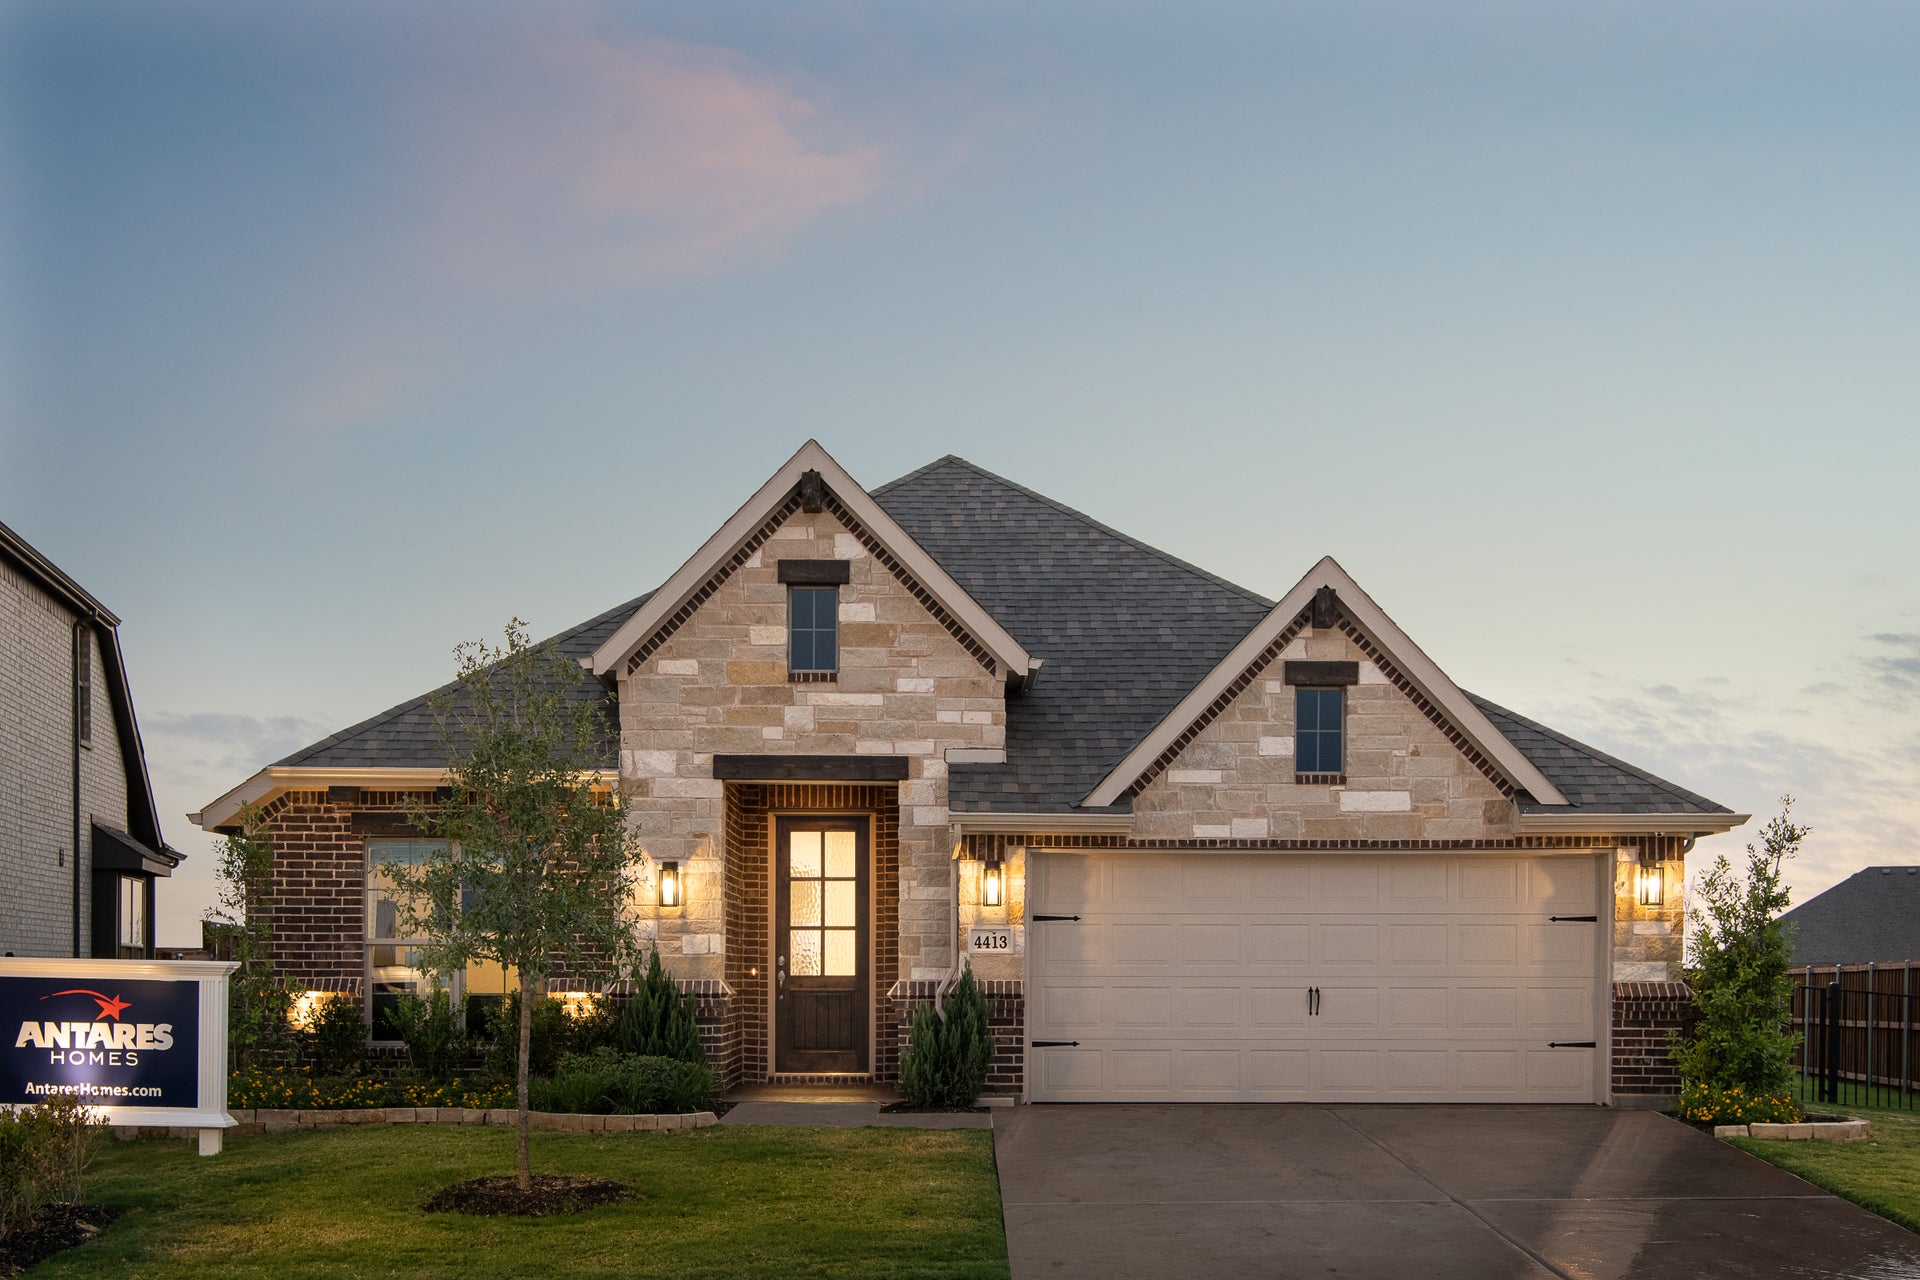 2186 C with Stone. 2,186sf New Home in Heartland, TX